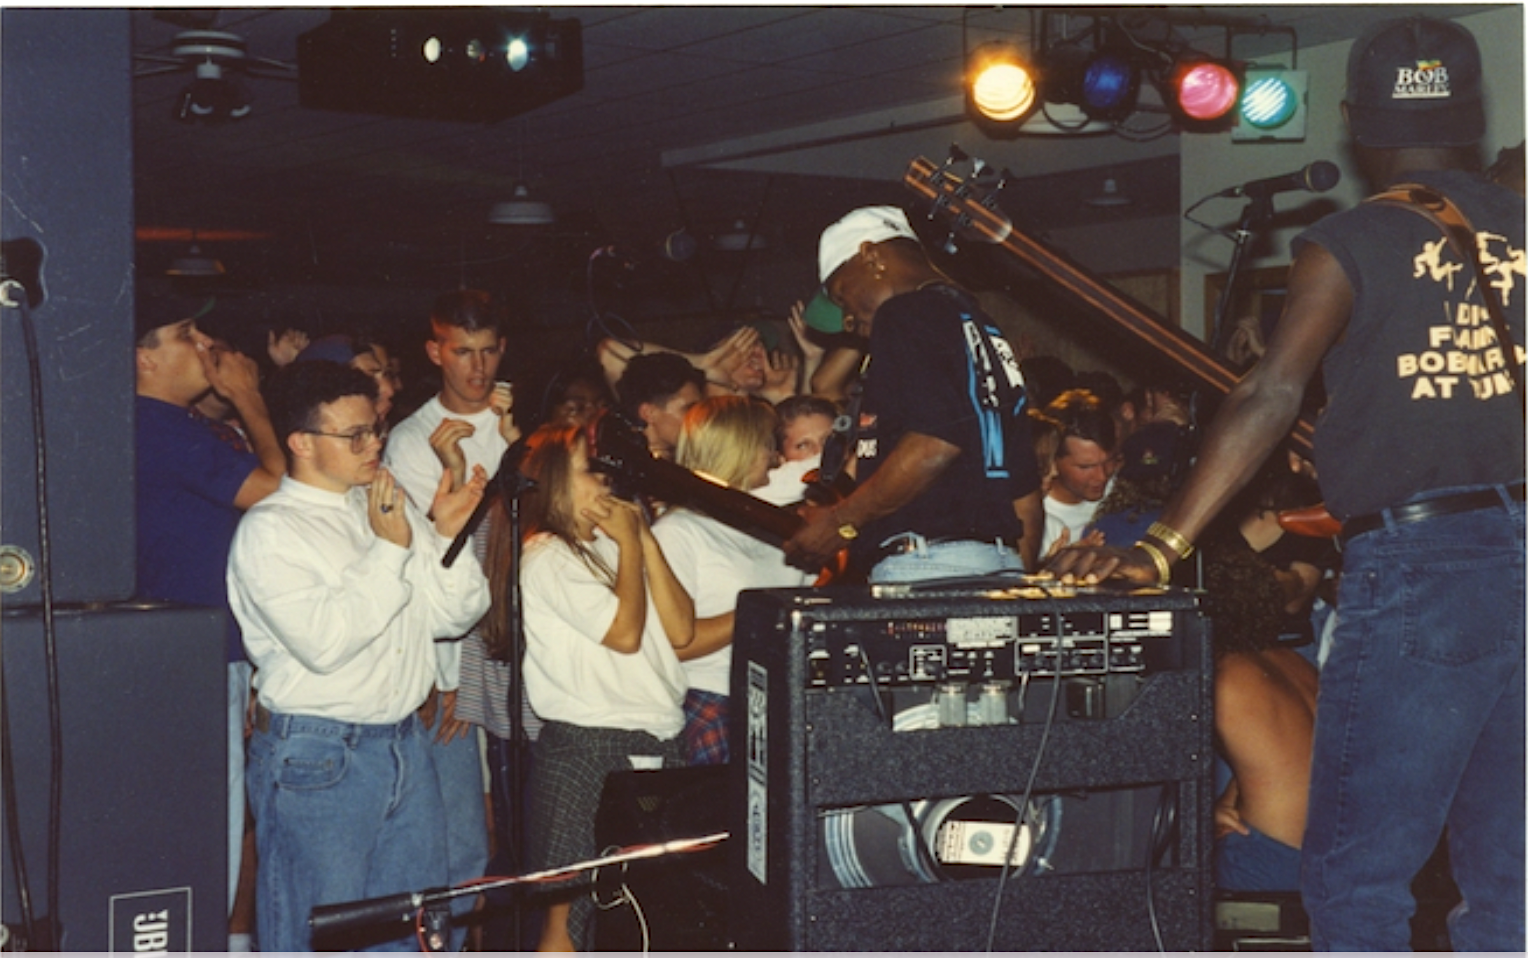 Pacific Students Enjoying A Concert In The Milky Way, Early 2000s